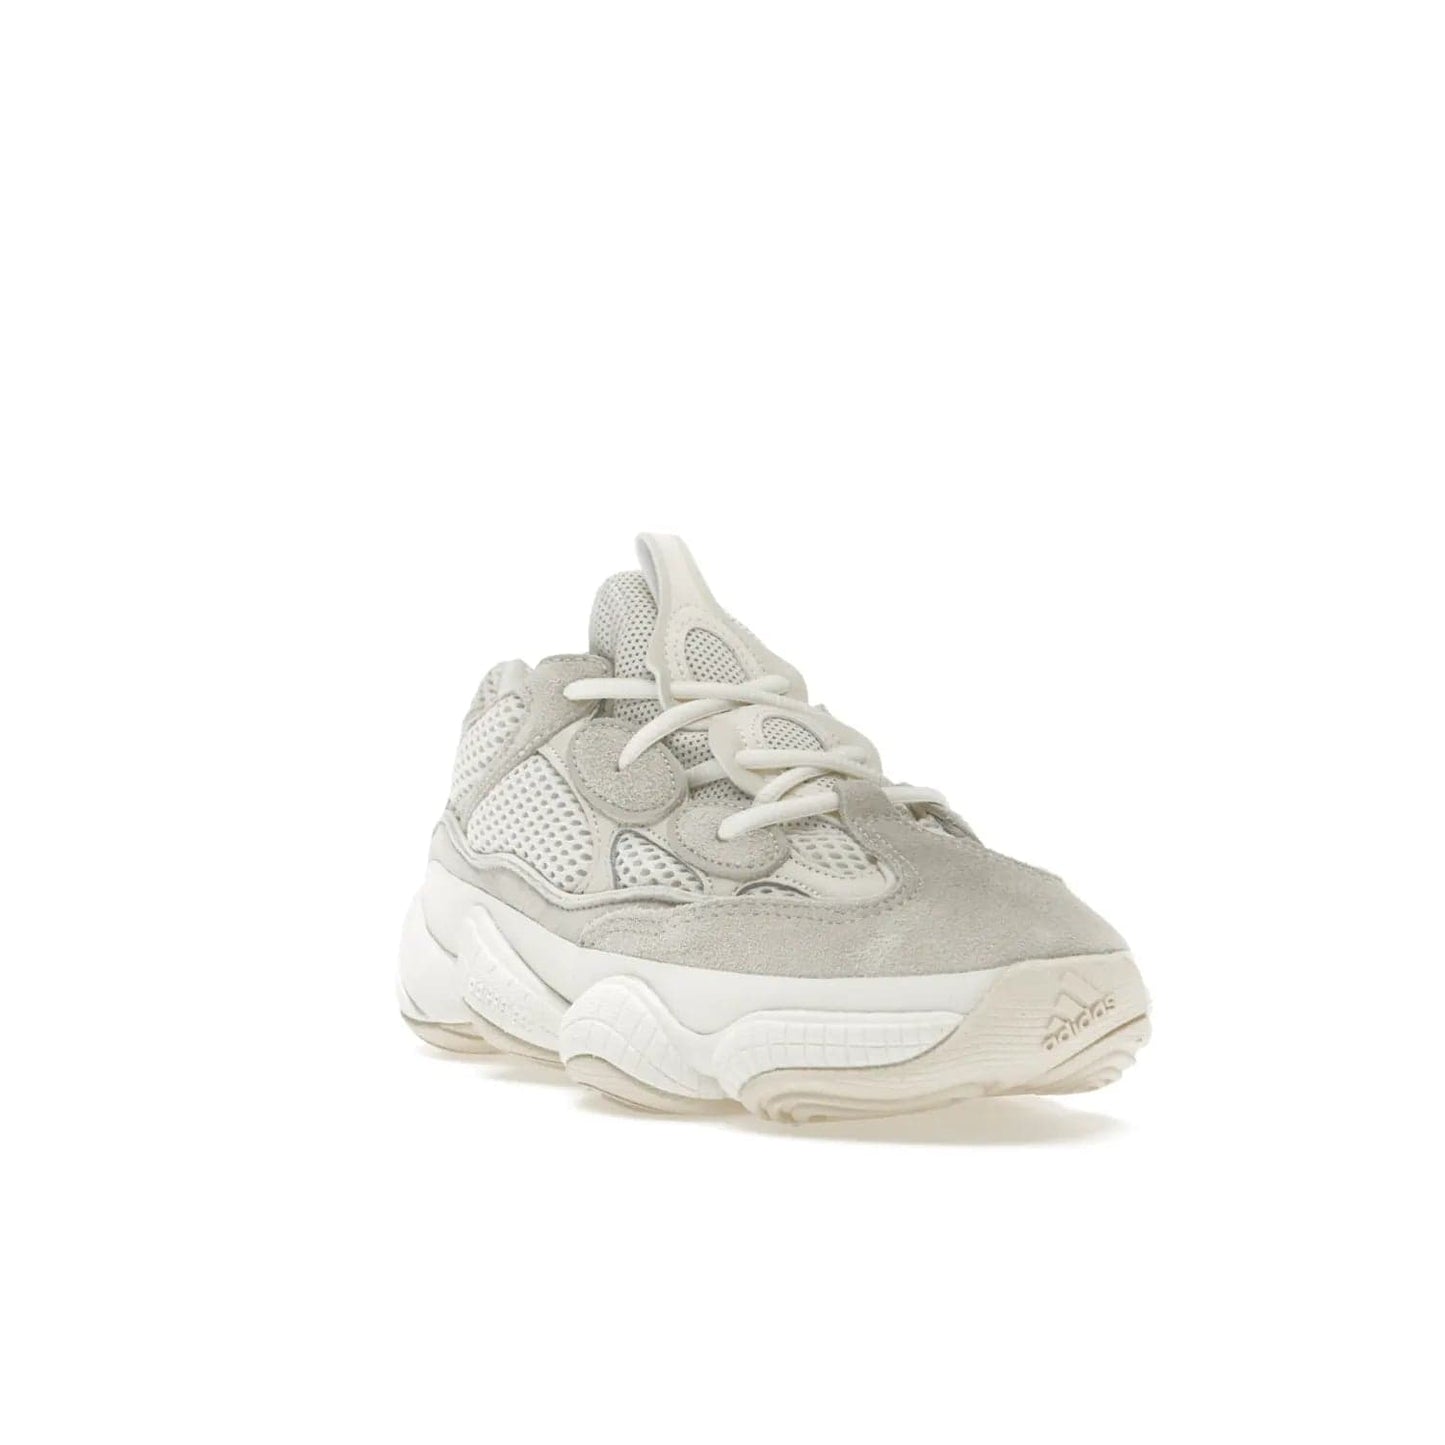 adidas Yeezy 500 Bone White (2023) - Image 7 - Only at www.BallersClubKickz.com - Experience the unique style of the adidas Yeezy 500 Bone White. Featuring a Bone White colorway and white accents, durable construction and comfortably light feel. Get ready to make a statement in 2023.